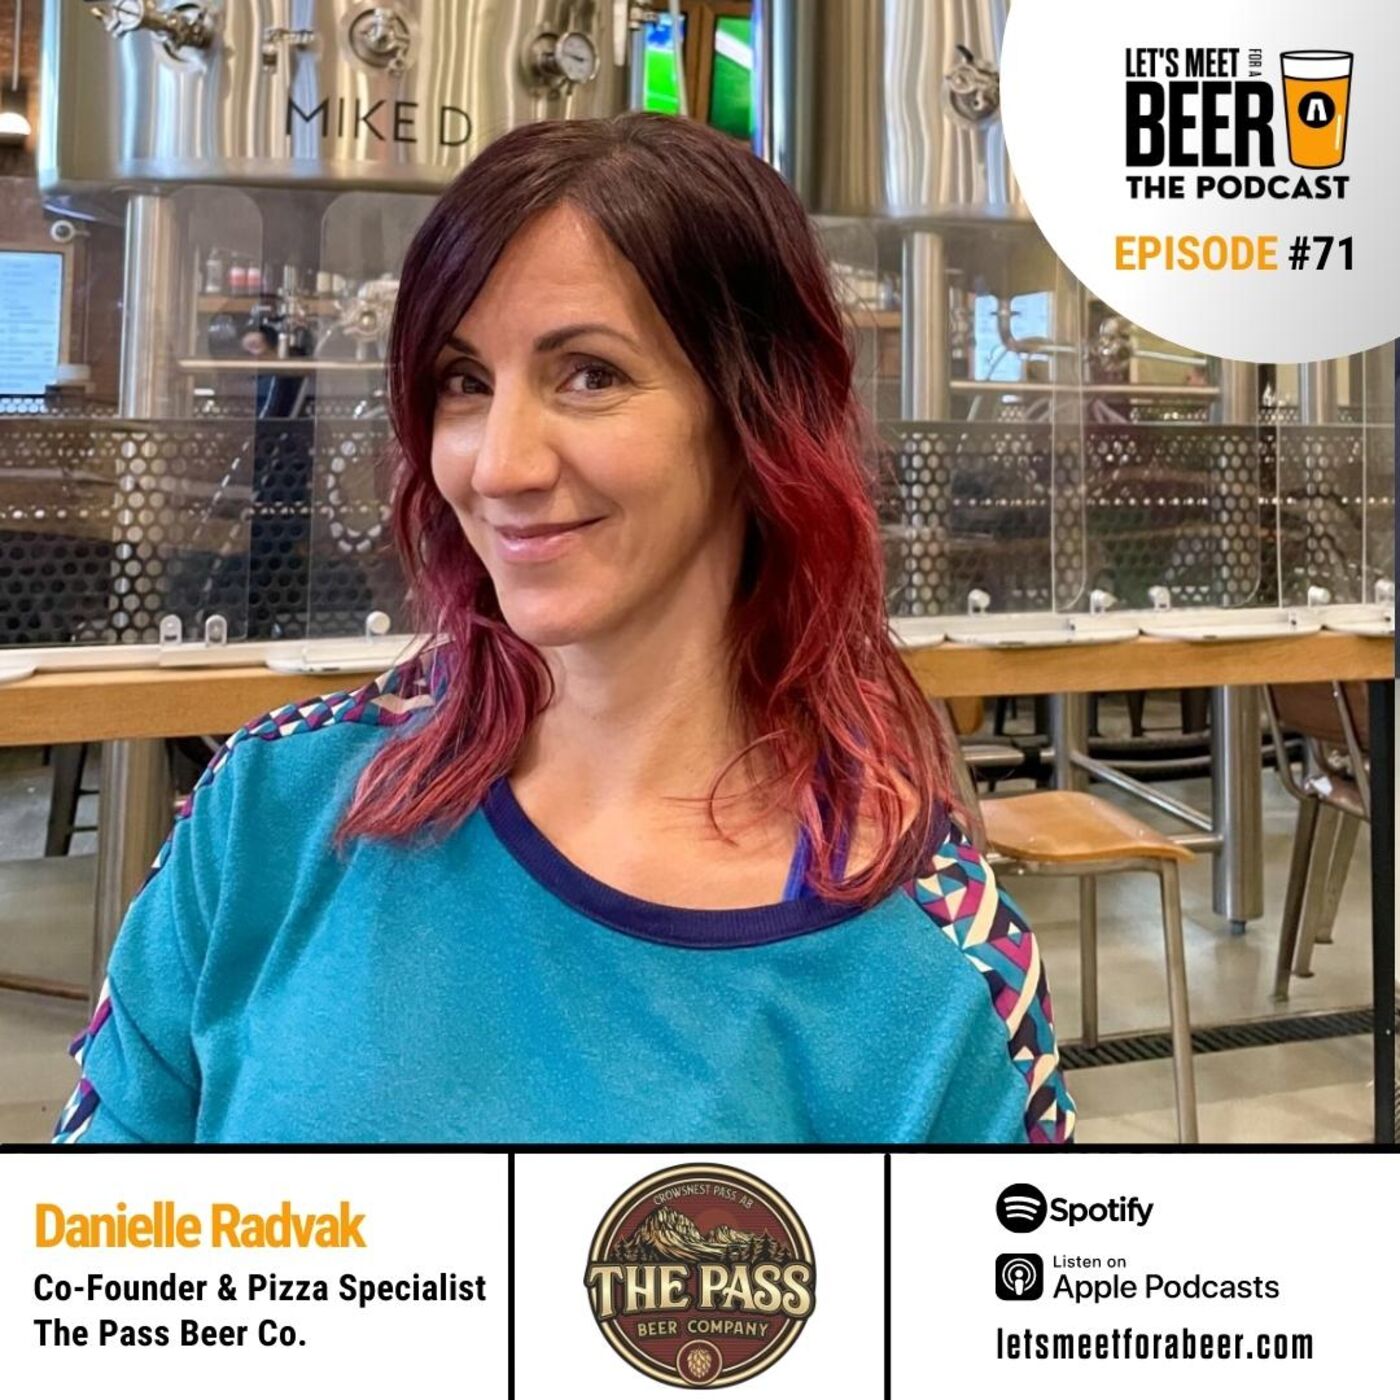 Episode #71 – Danielle Radvak & Max Rude with The Pass Beer Co.